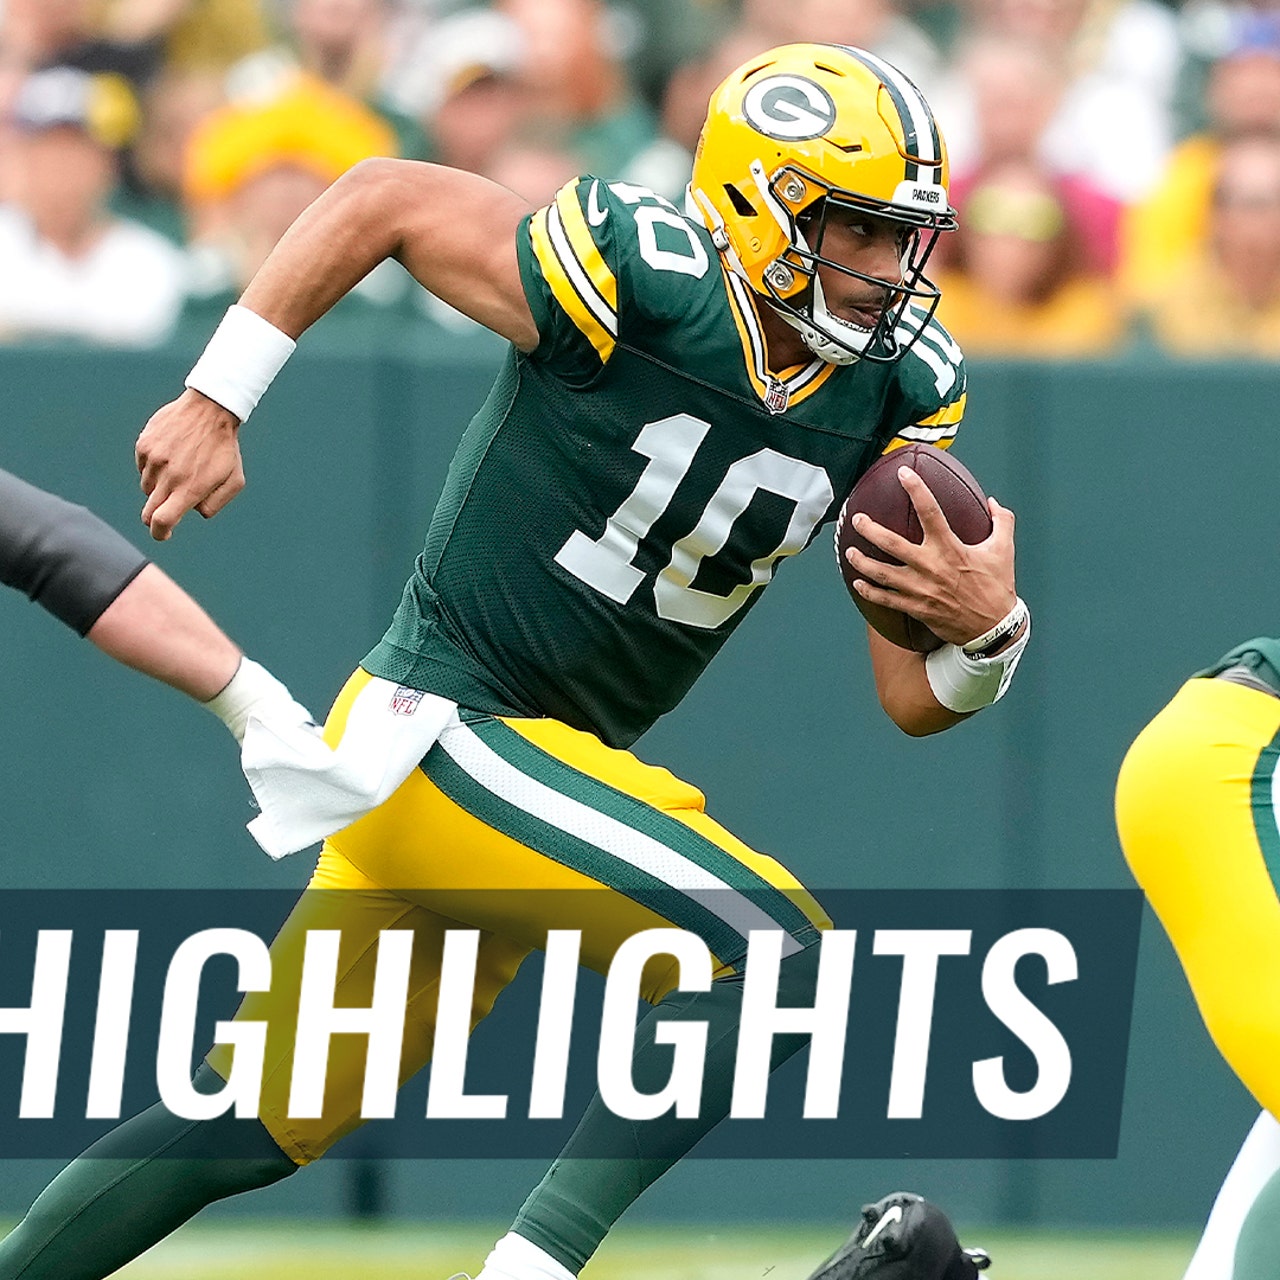 Jordan Love leads the Packers' comeback with two fourth-quarter touchdowns  to defeat the Saints, NFL Highlights